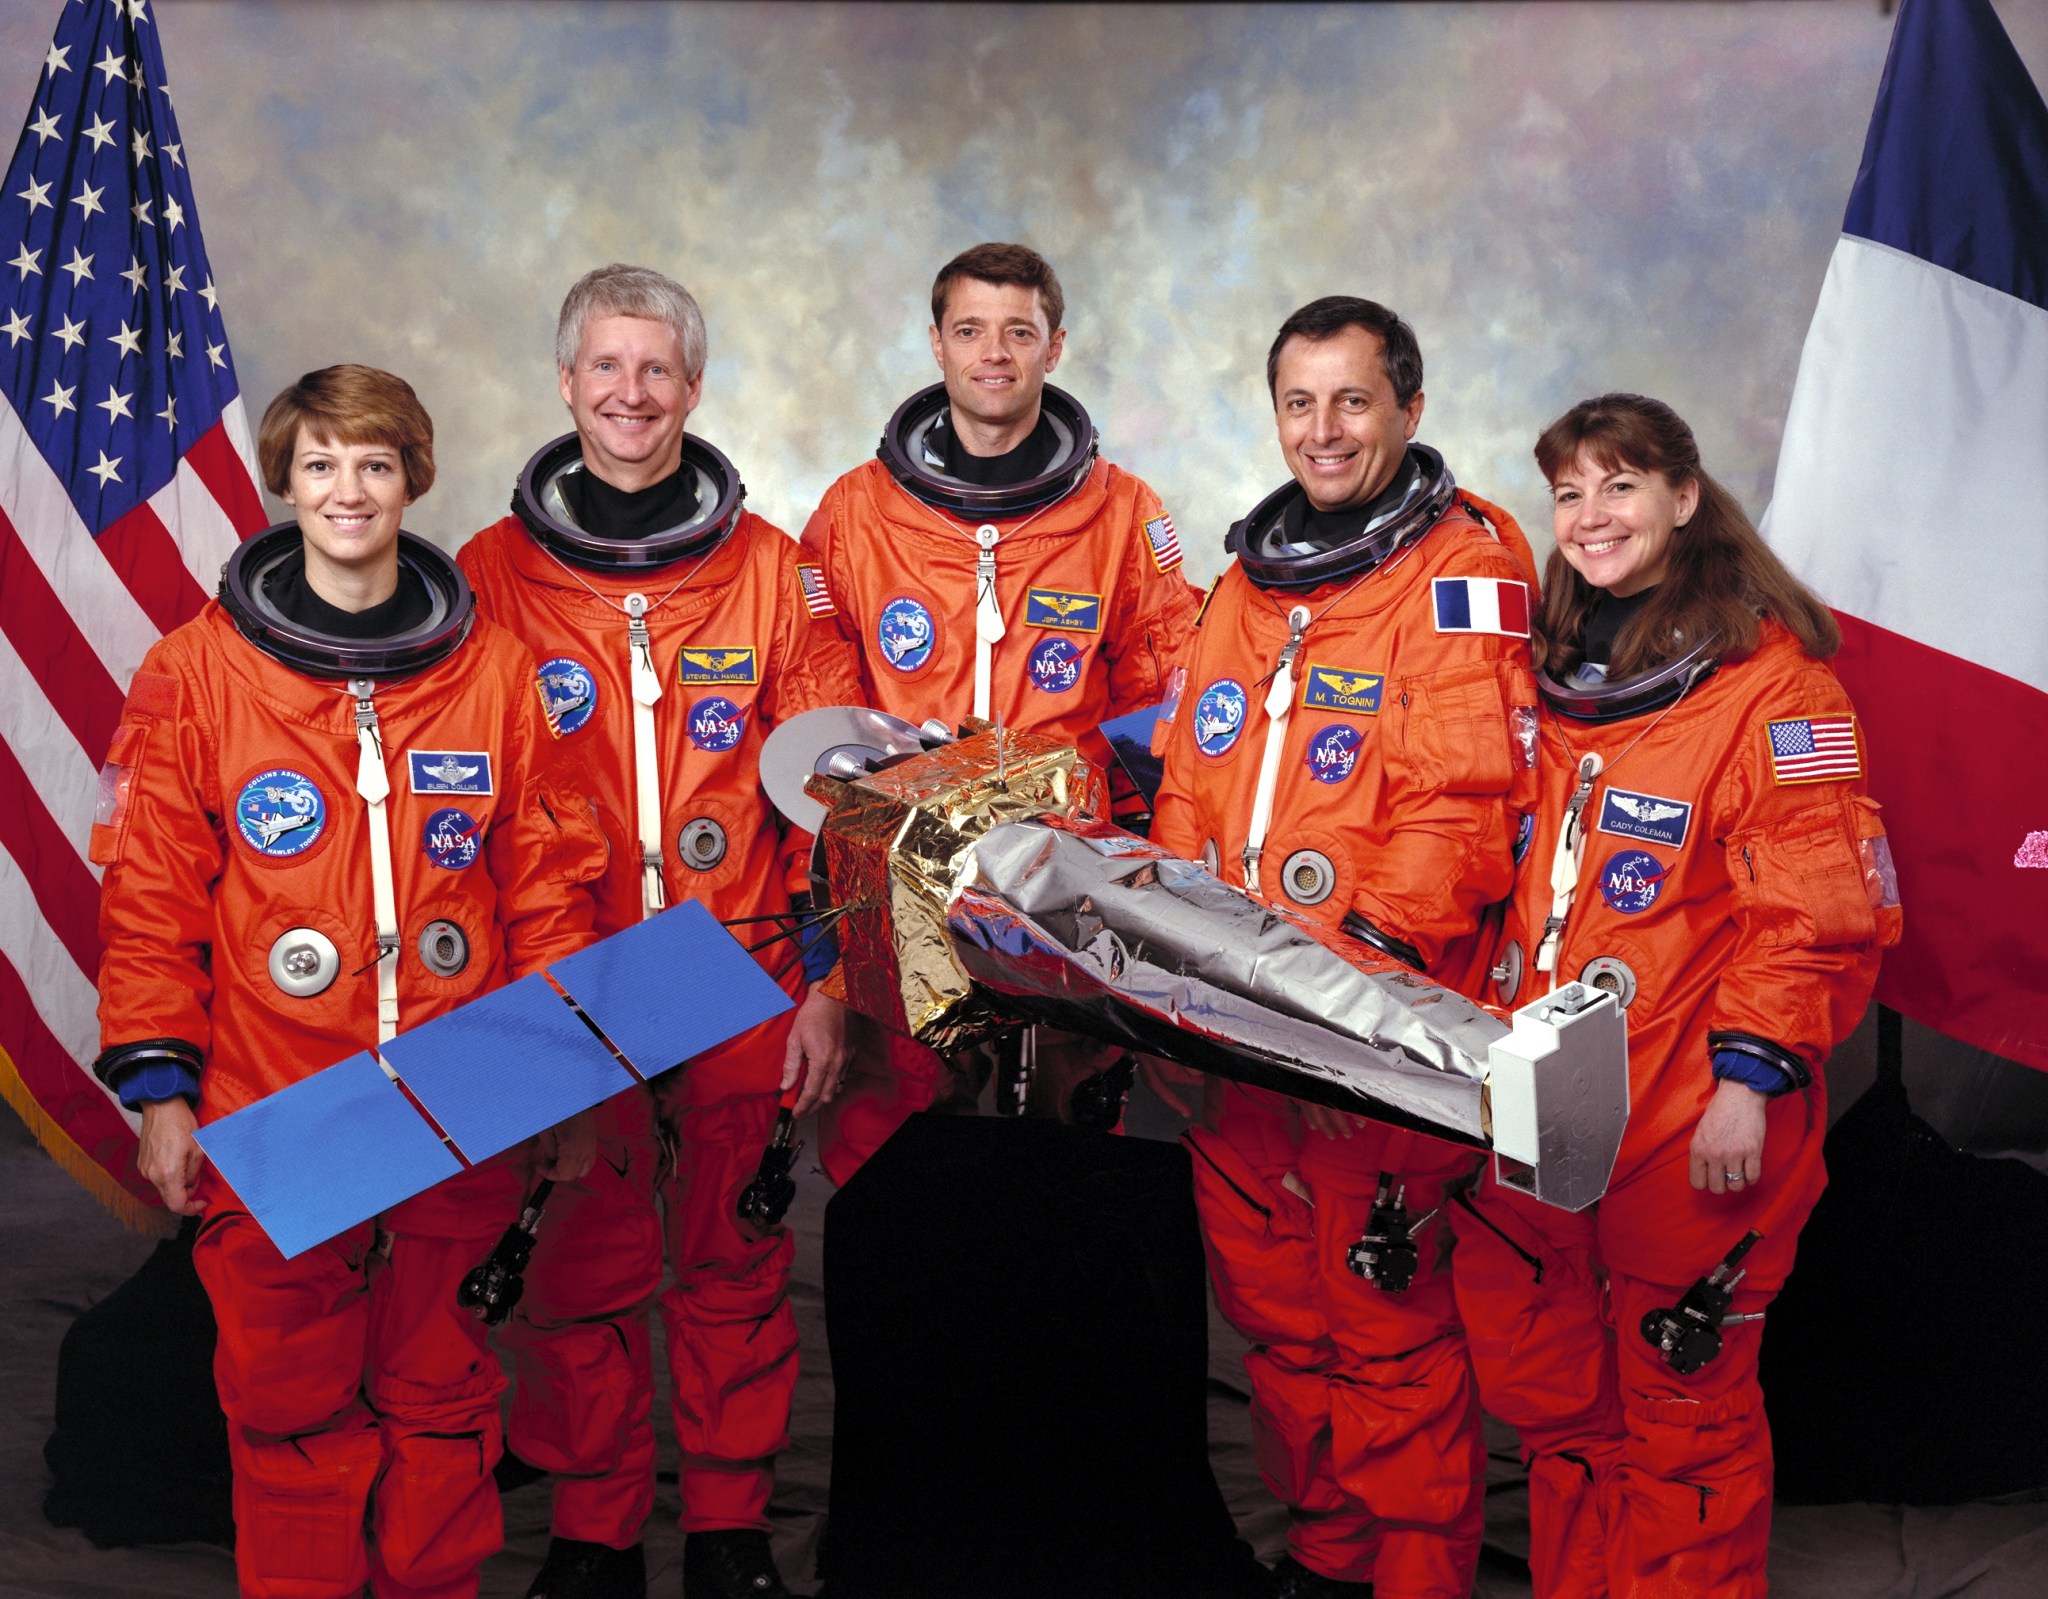 The crew of five astronauts for STS-93 in orange spacesuits pose for portrait